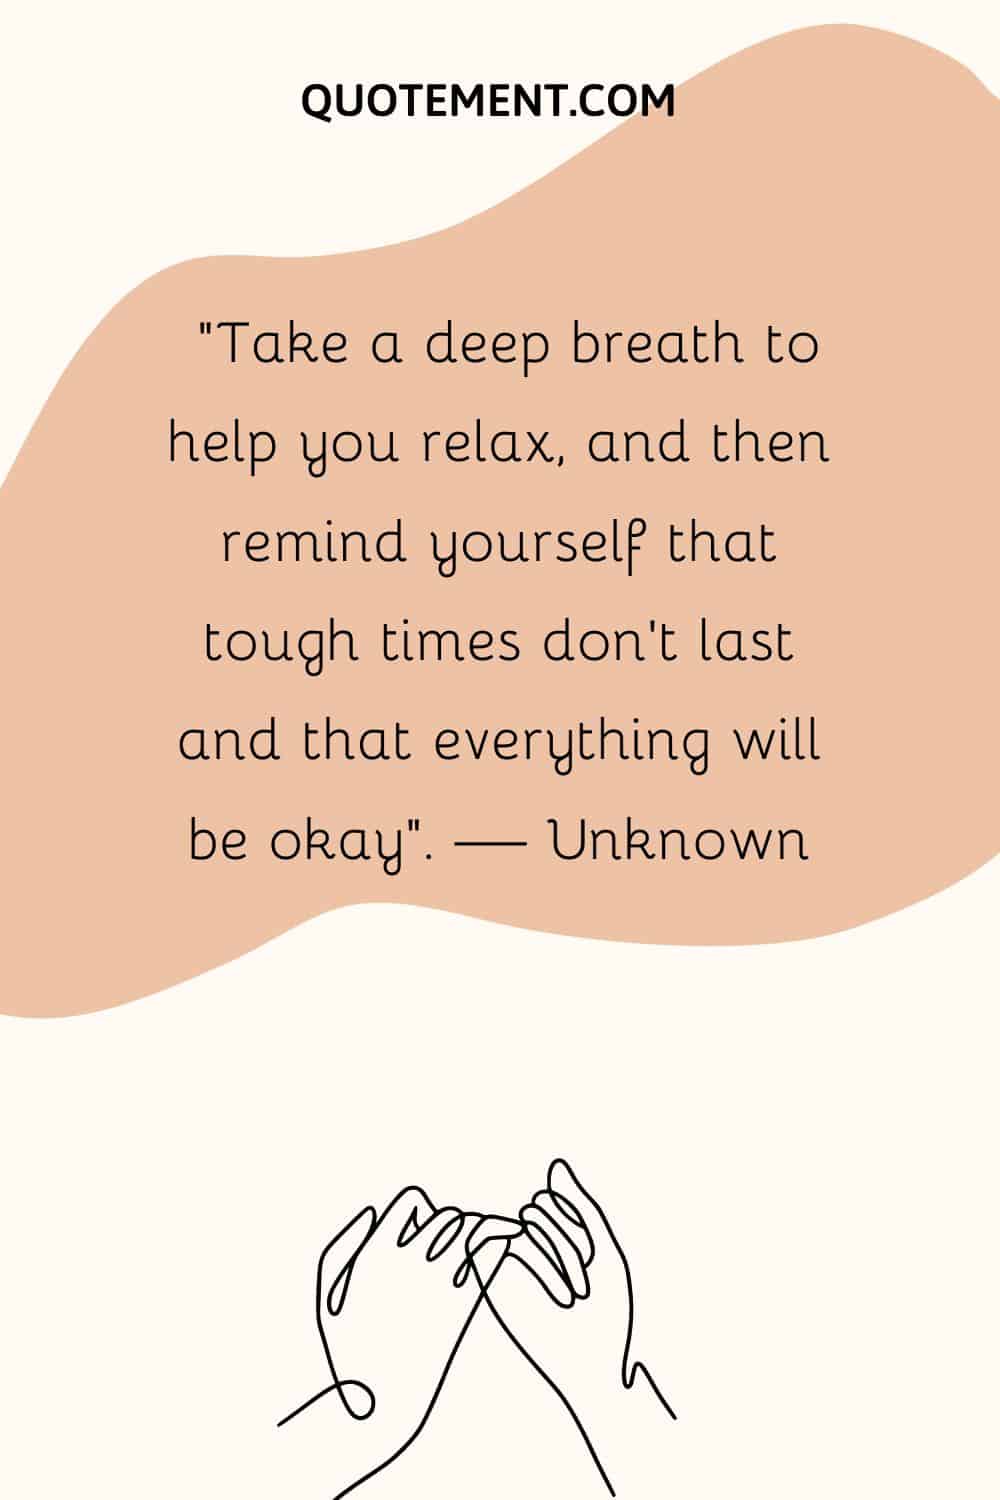 “Take a deep breath to help you relax, and then remind yourself that tough times don’t last and that everything will be okay”. — Unknown